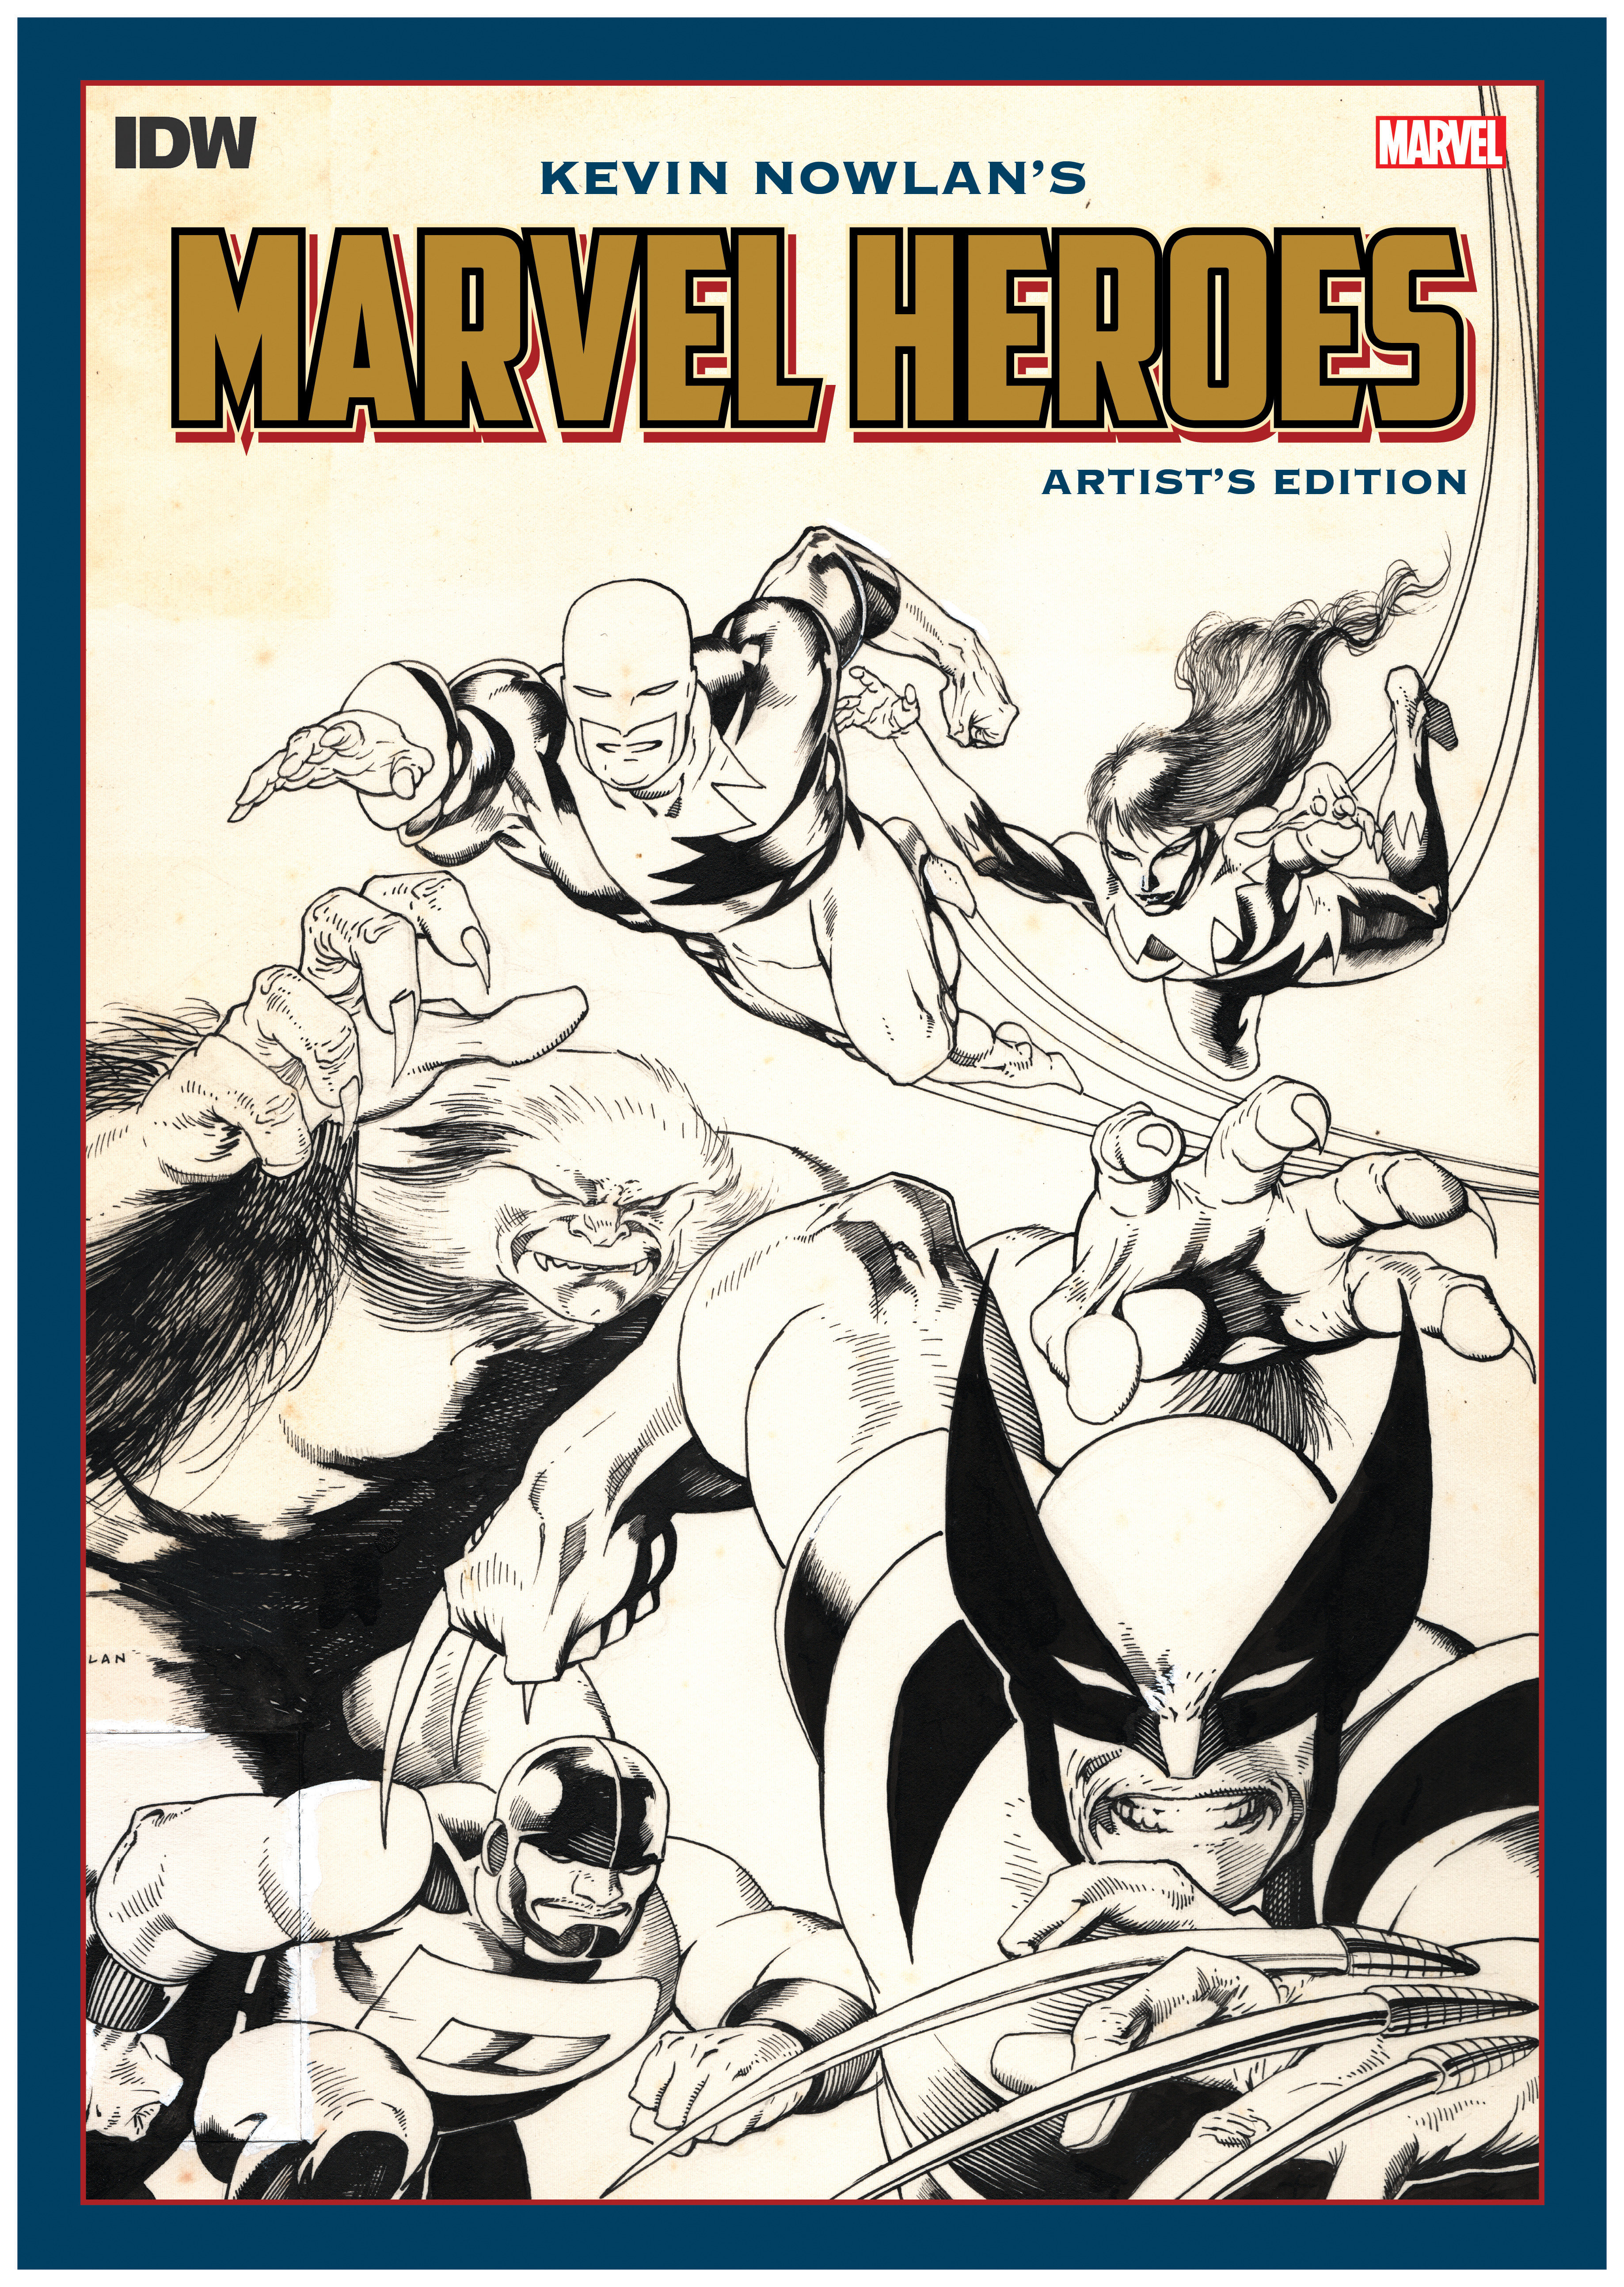 Kevin Nowlan Marvel Heroes Artist Edition Hardcover